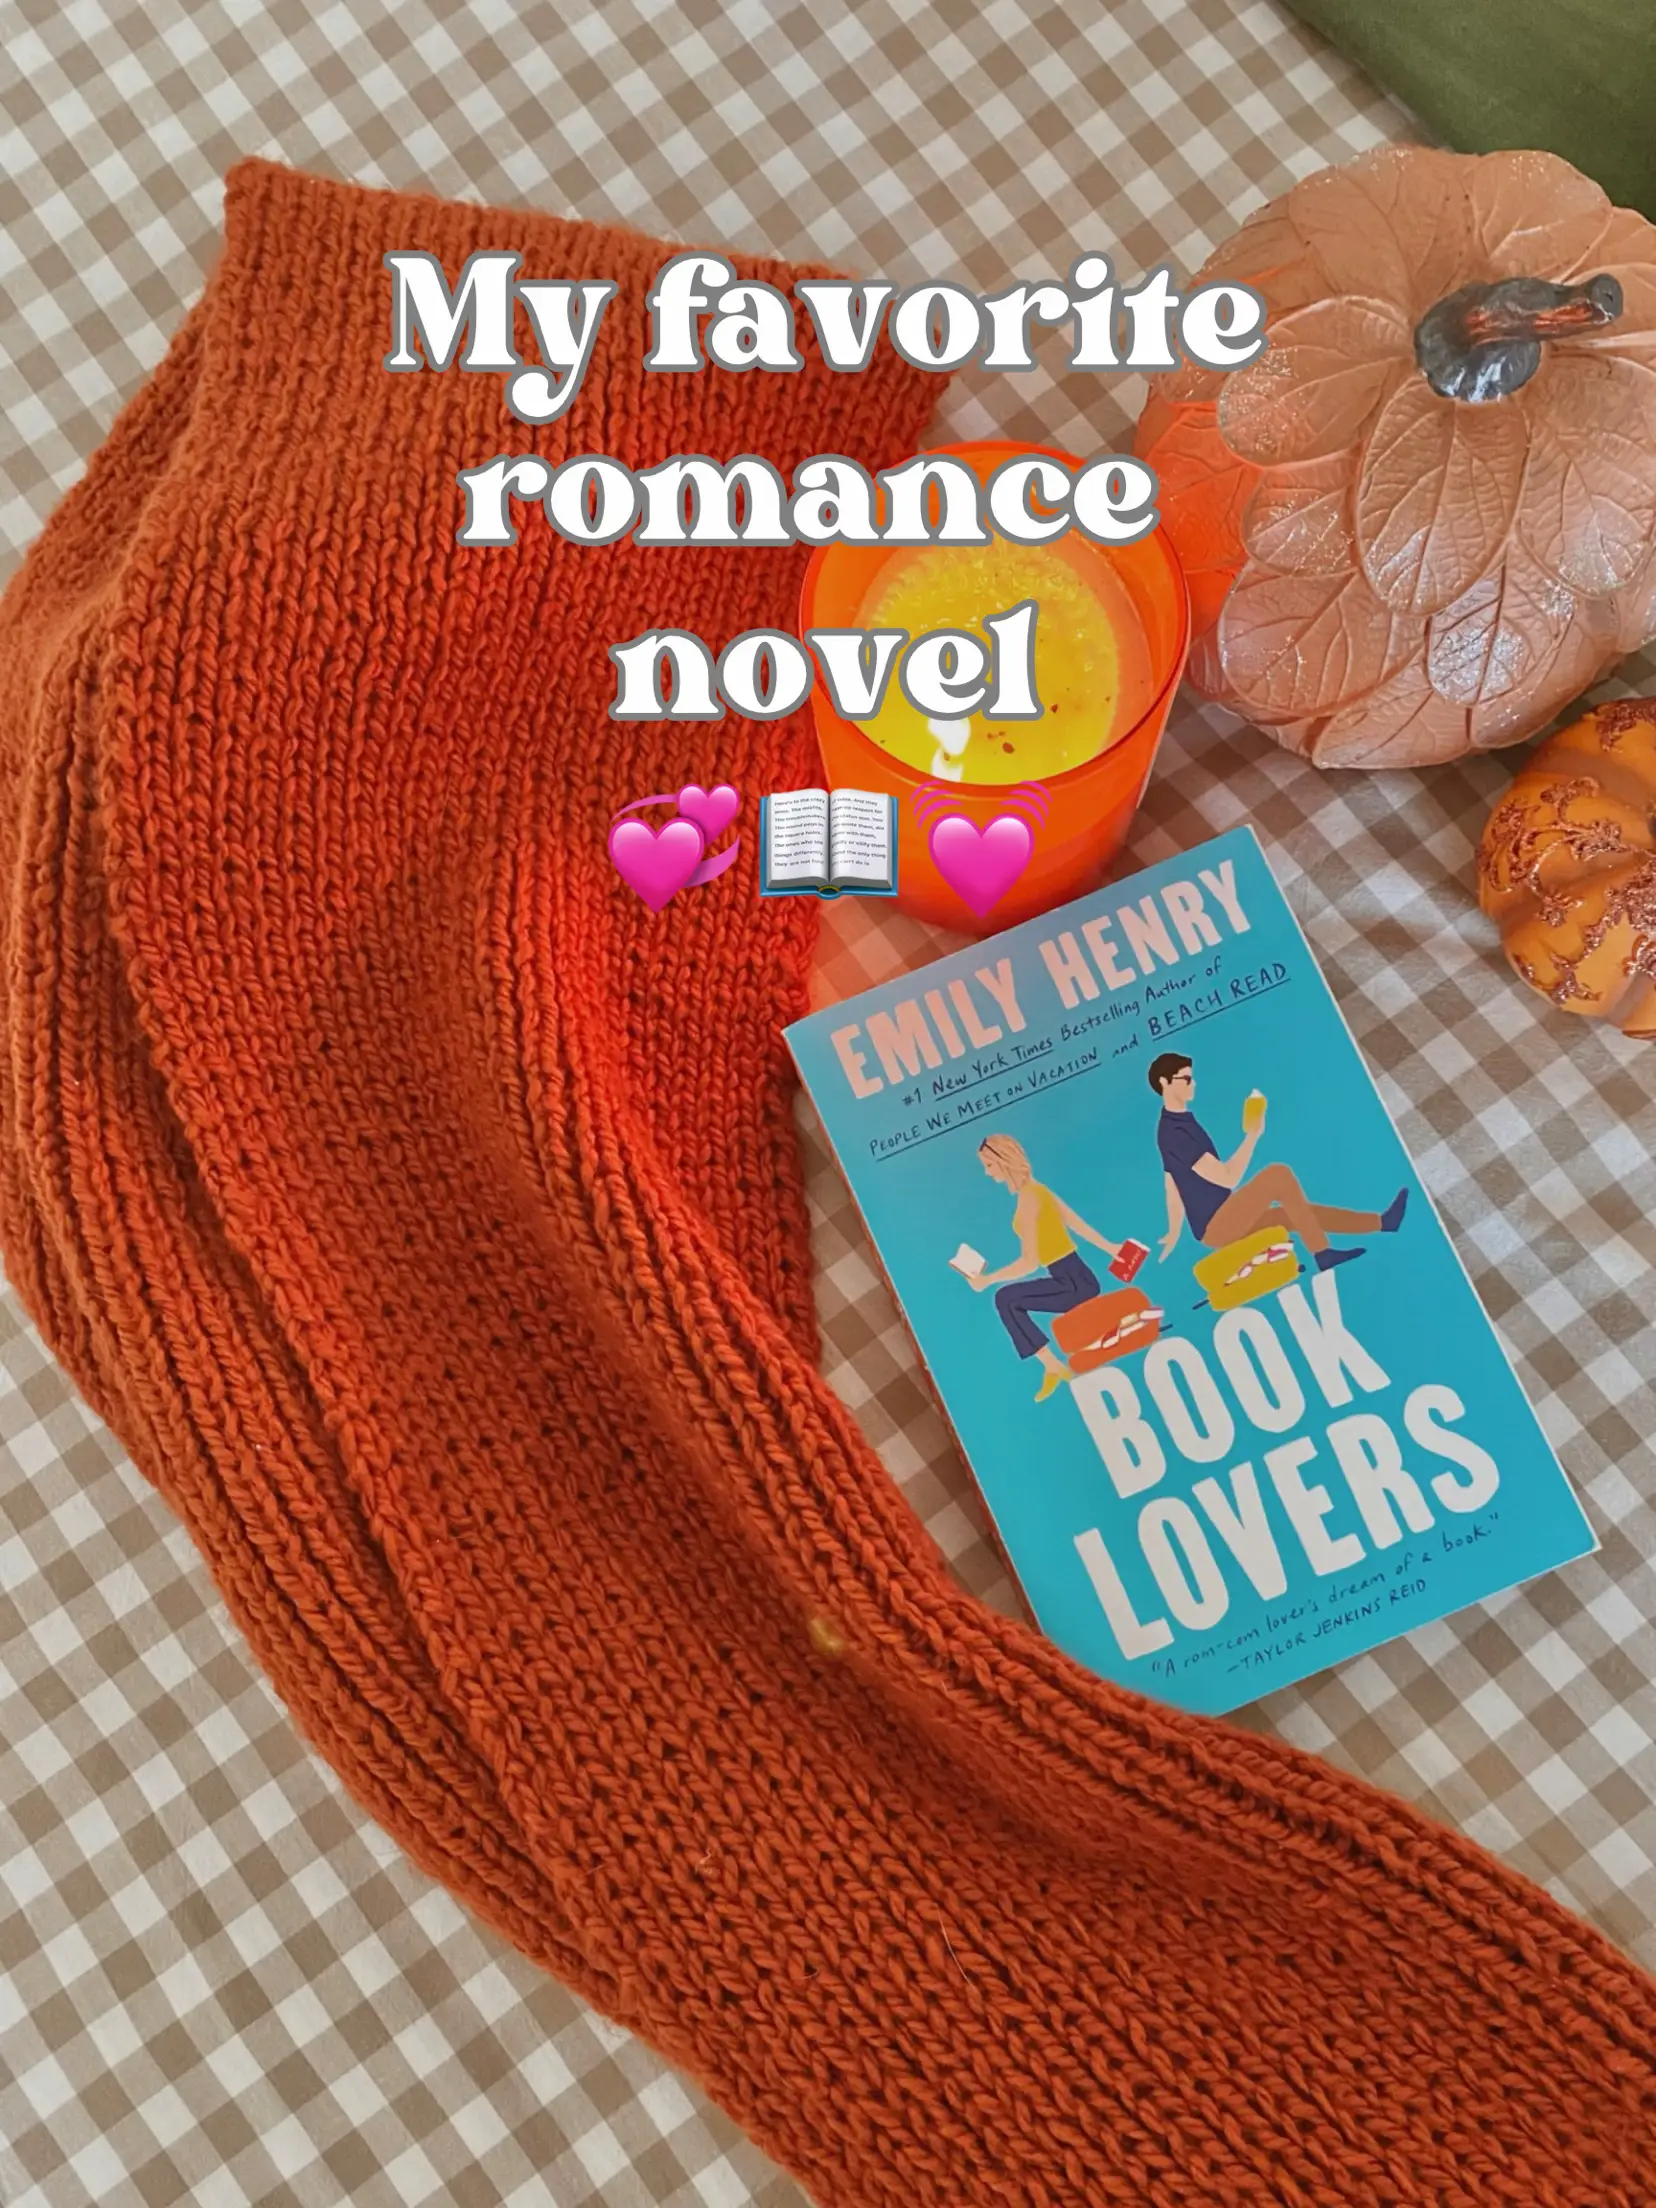  A book titled Book Lovers is laying on a blanket.